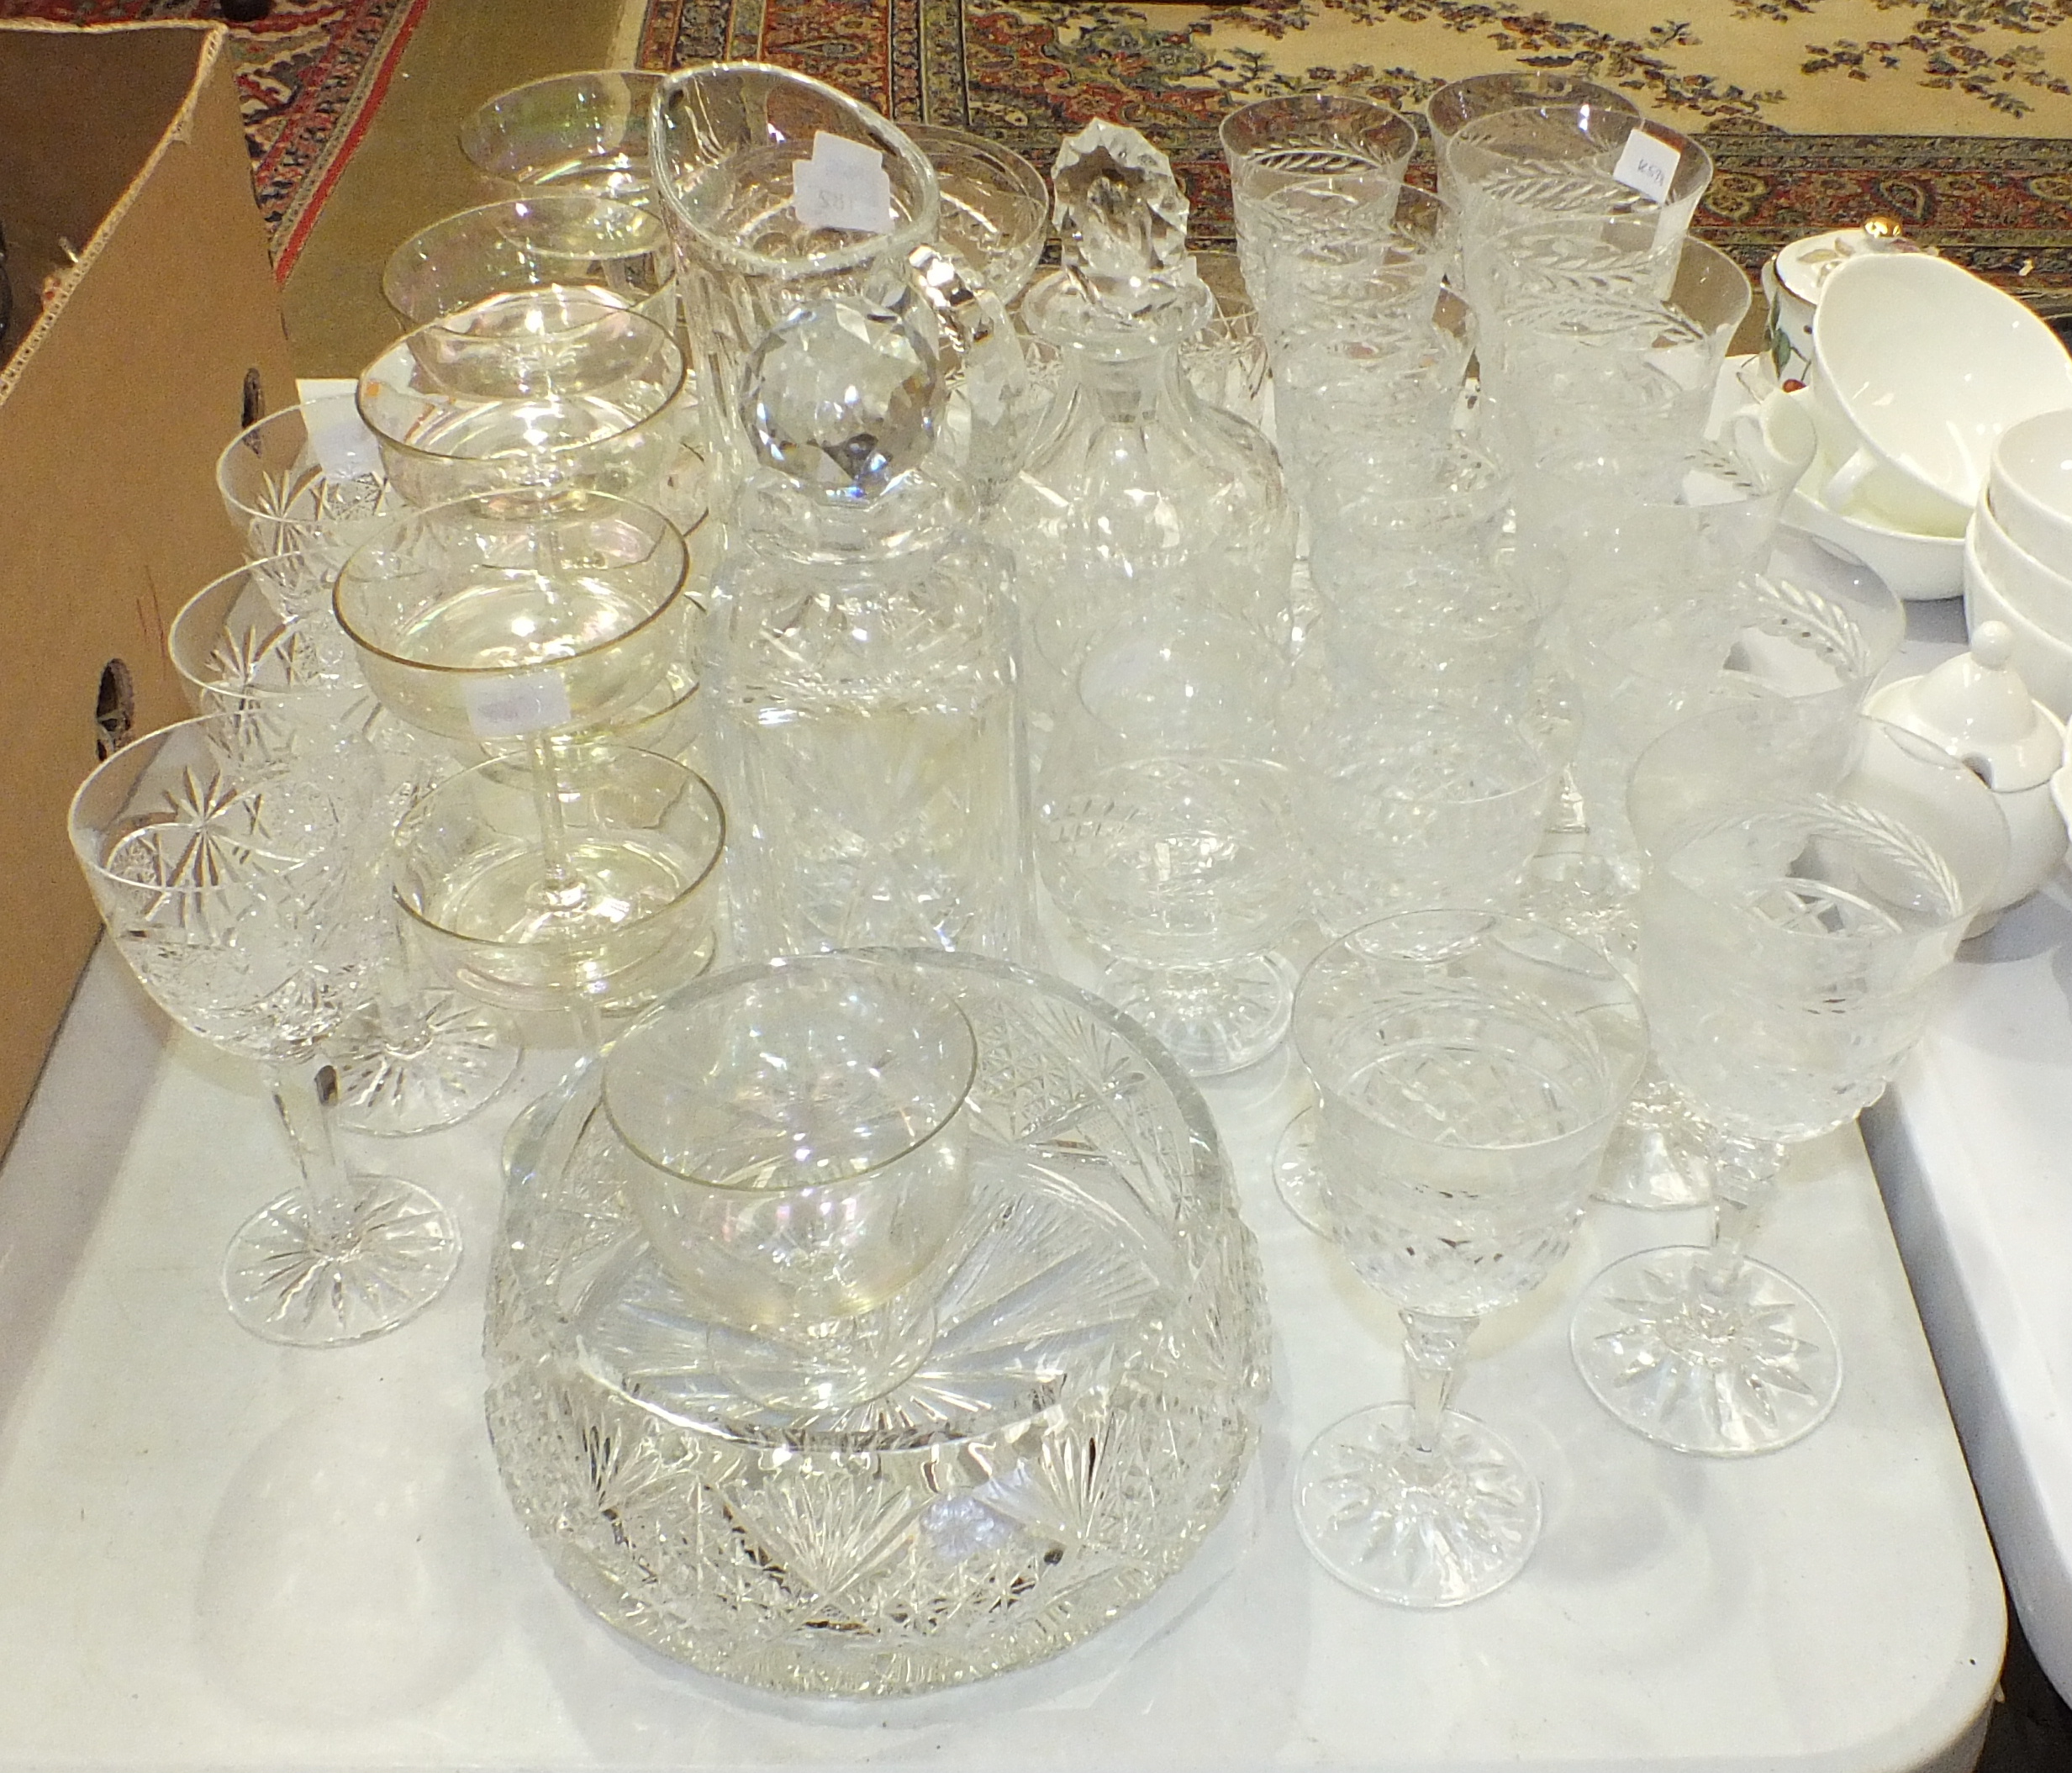 A cut-glass jug, two decanters, a bowl and a collection of various drinking glasses. - Image 3 of 3